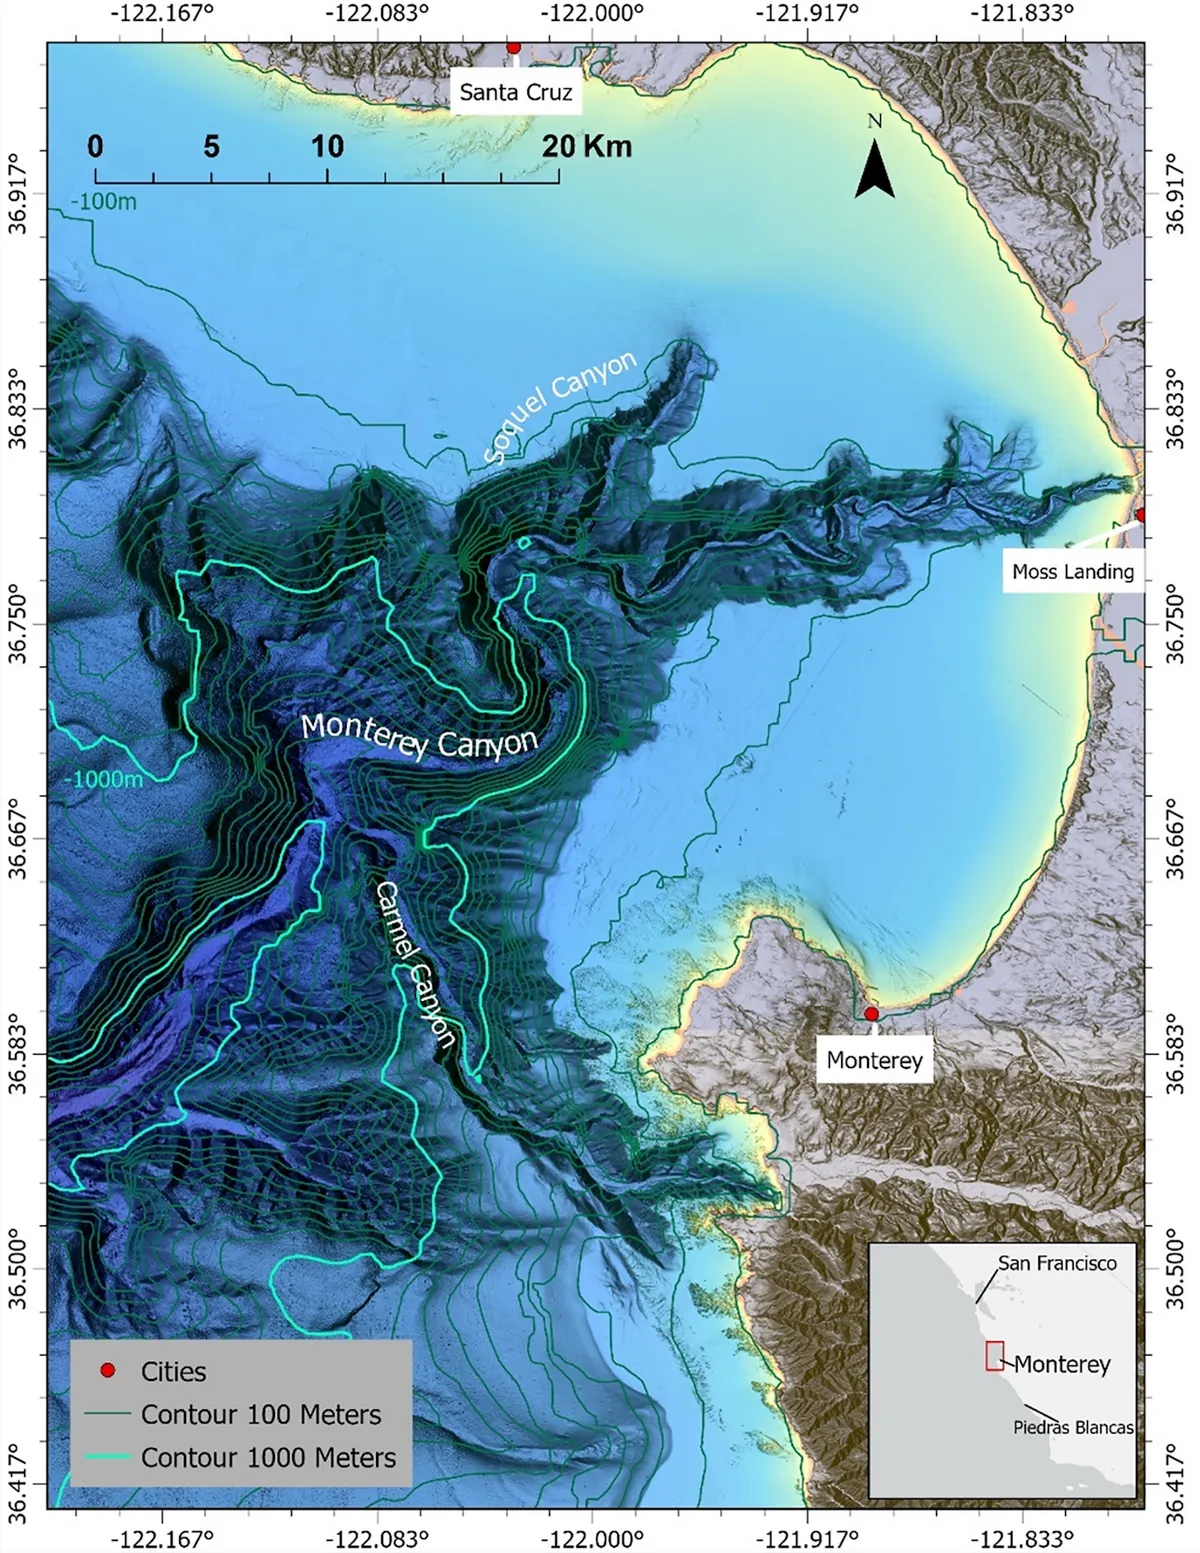 Study area and submarine canyon system of Monterey Bay in California